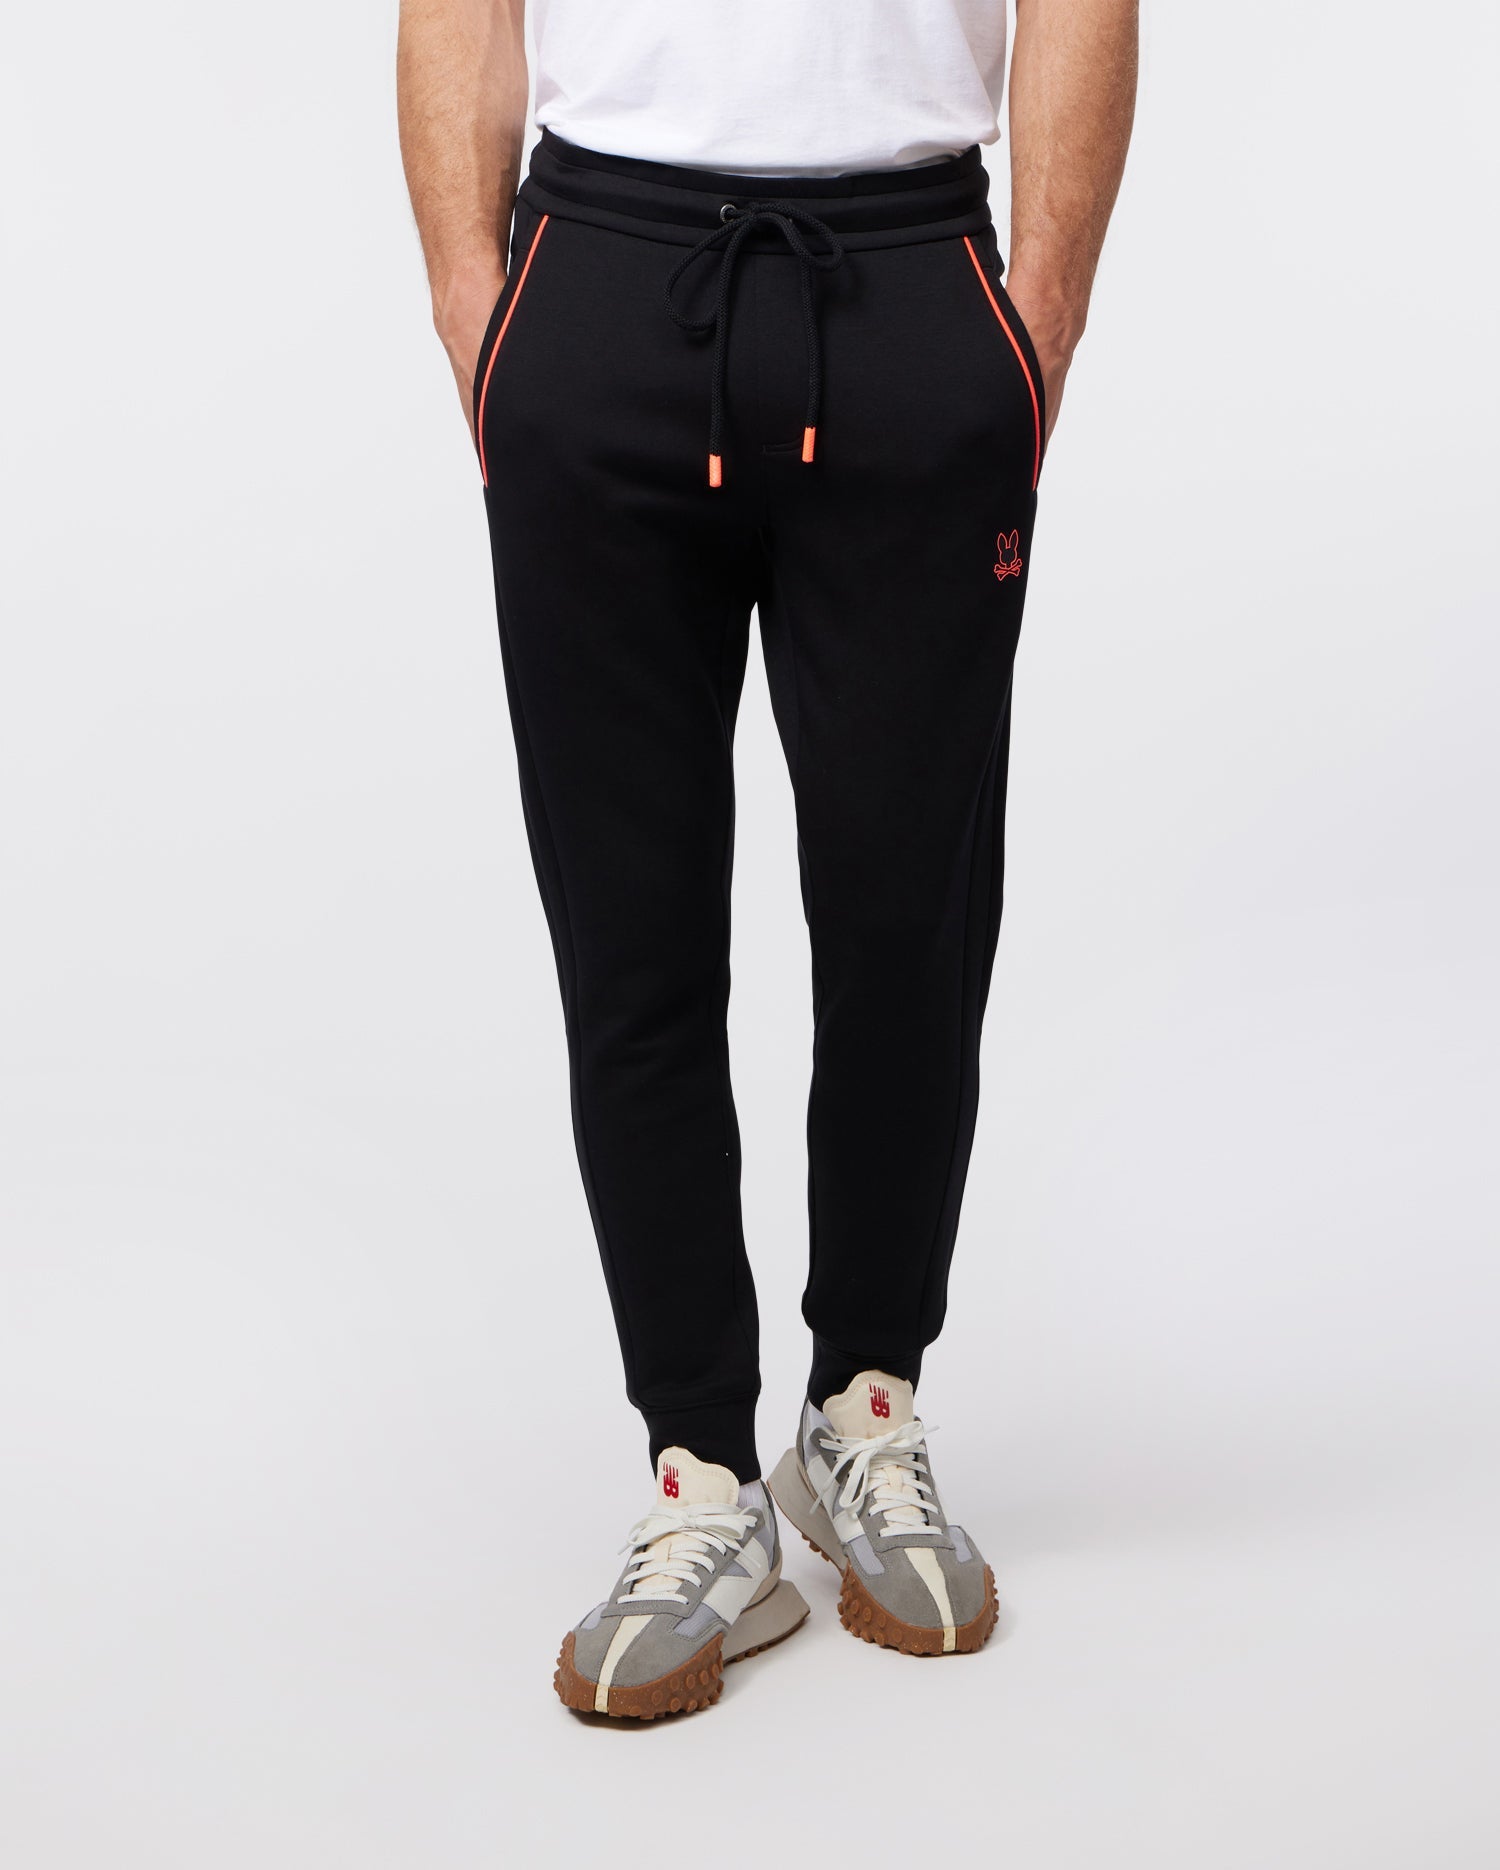 Men's Stylish Graphic Sweatpants: Stretchy, Comfy Joggers Perfect For  Working Out!